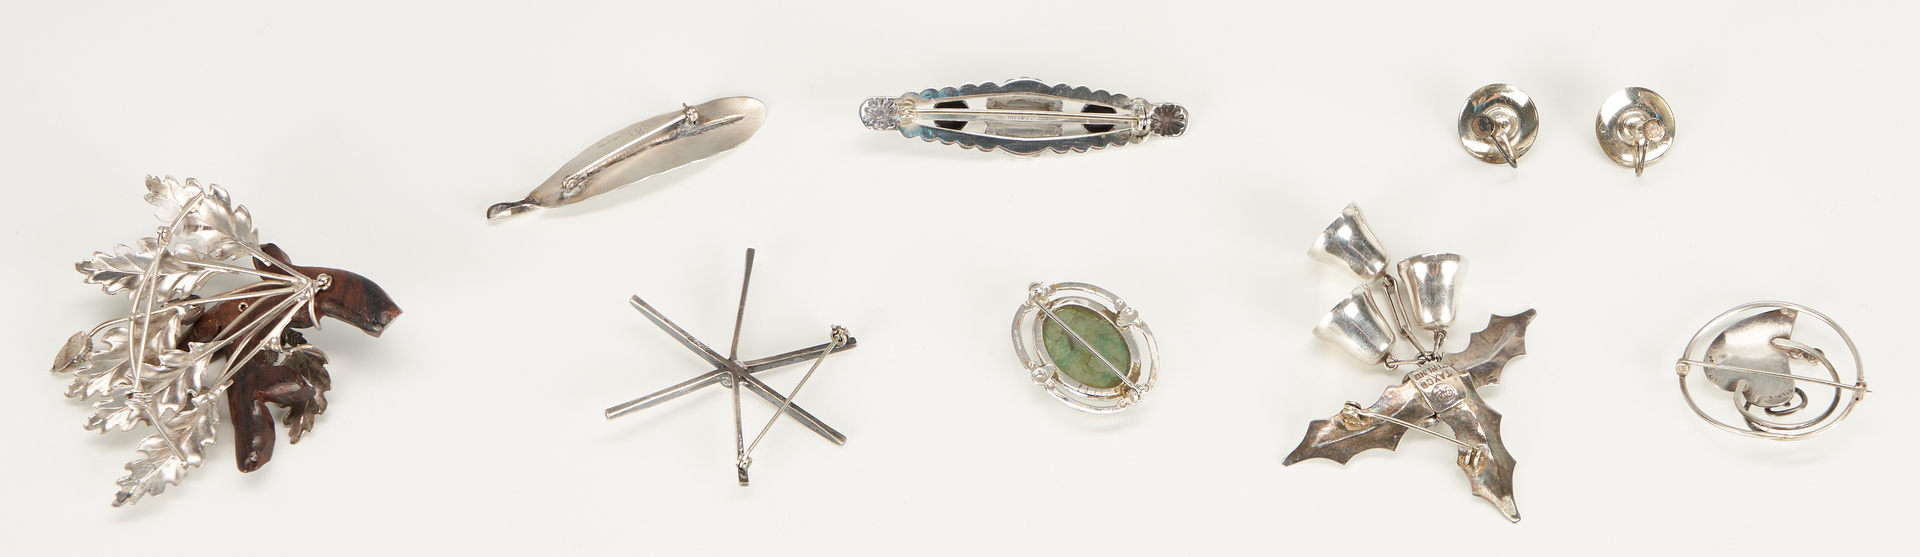 Lot 1240: 30 Sterling Silver Items, incl. Danish Art Nouveau, Brooches, Enameled